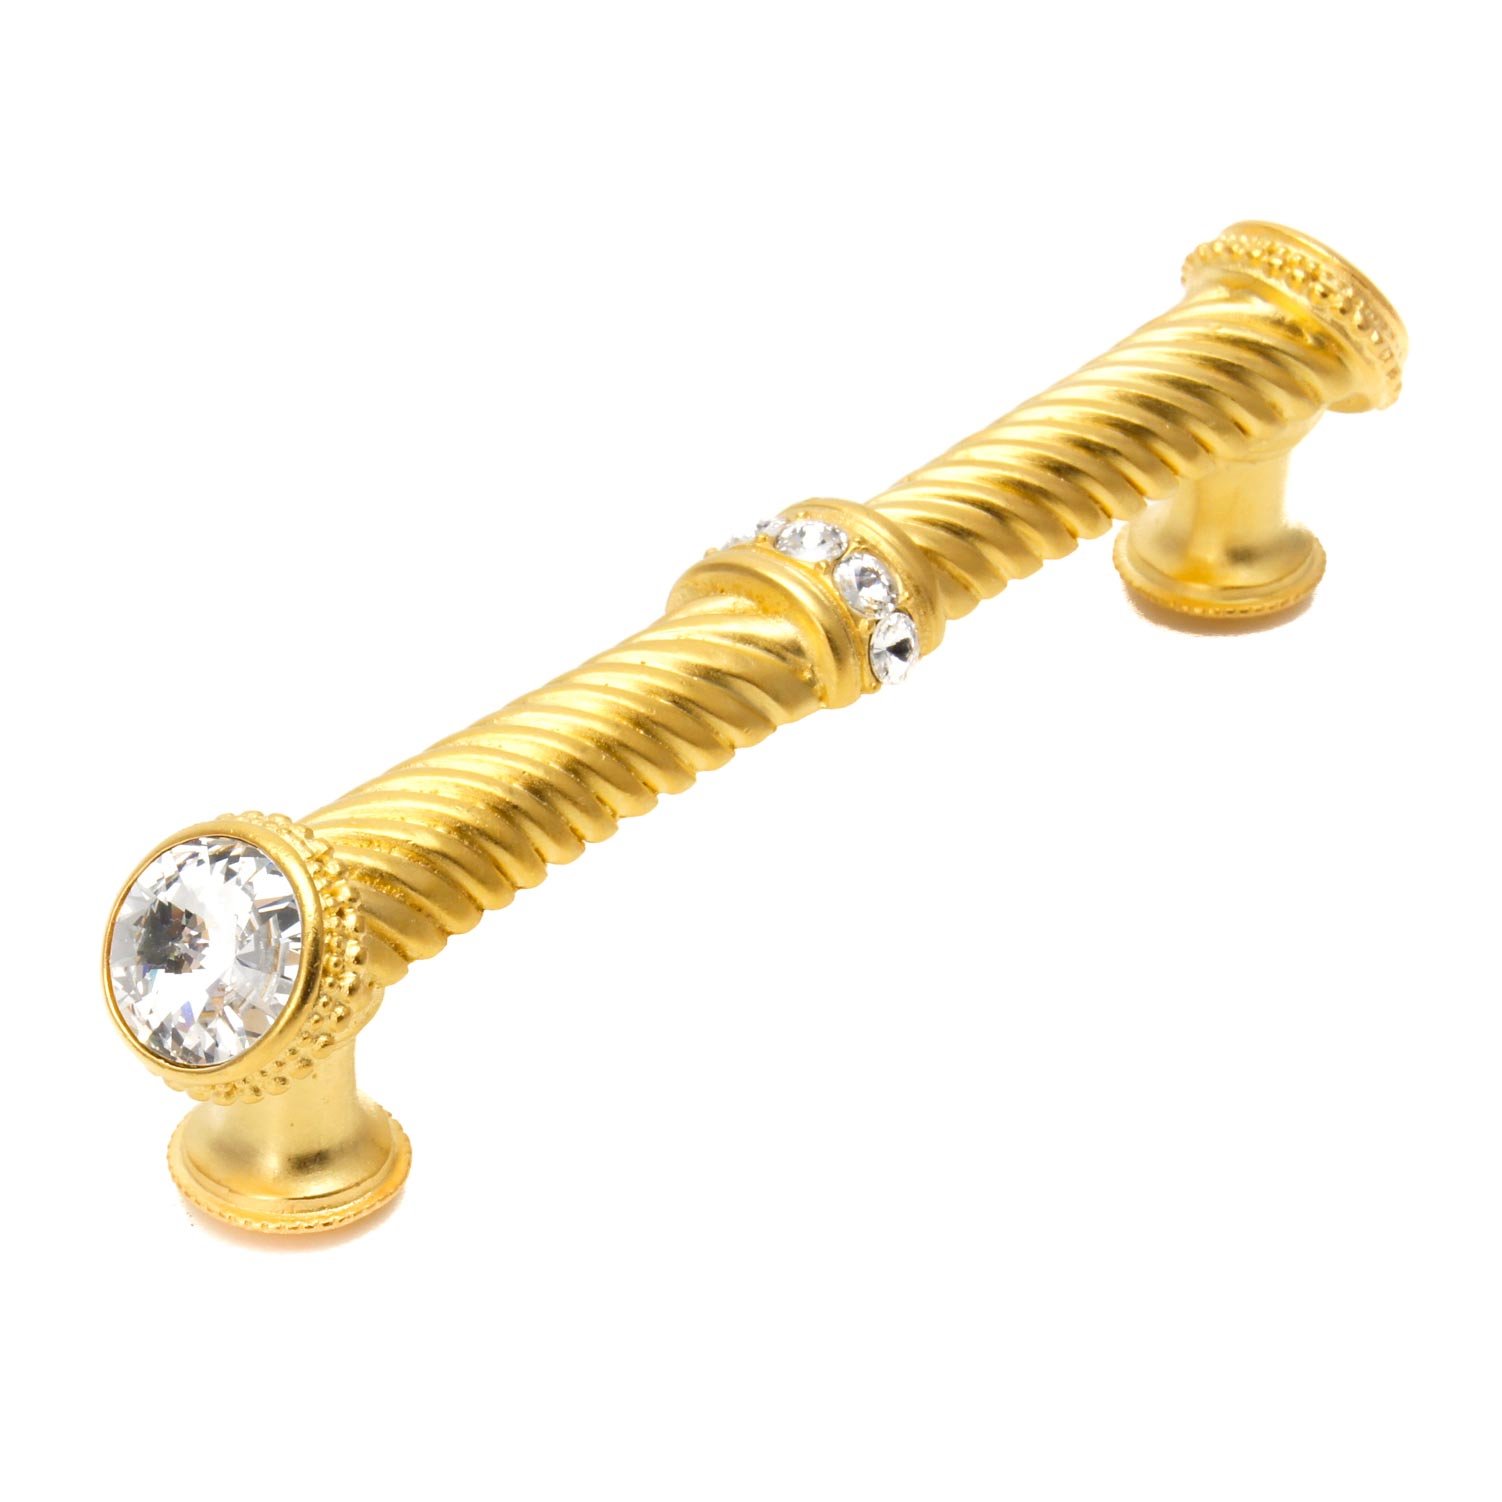 Caché 5" Centers Large Pull With End & Center Swarovski Crystals in Antique Brass with Vitrail Medium